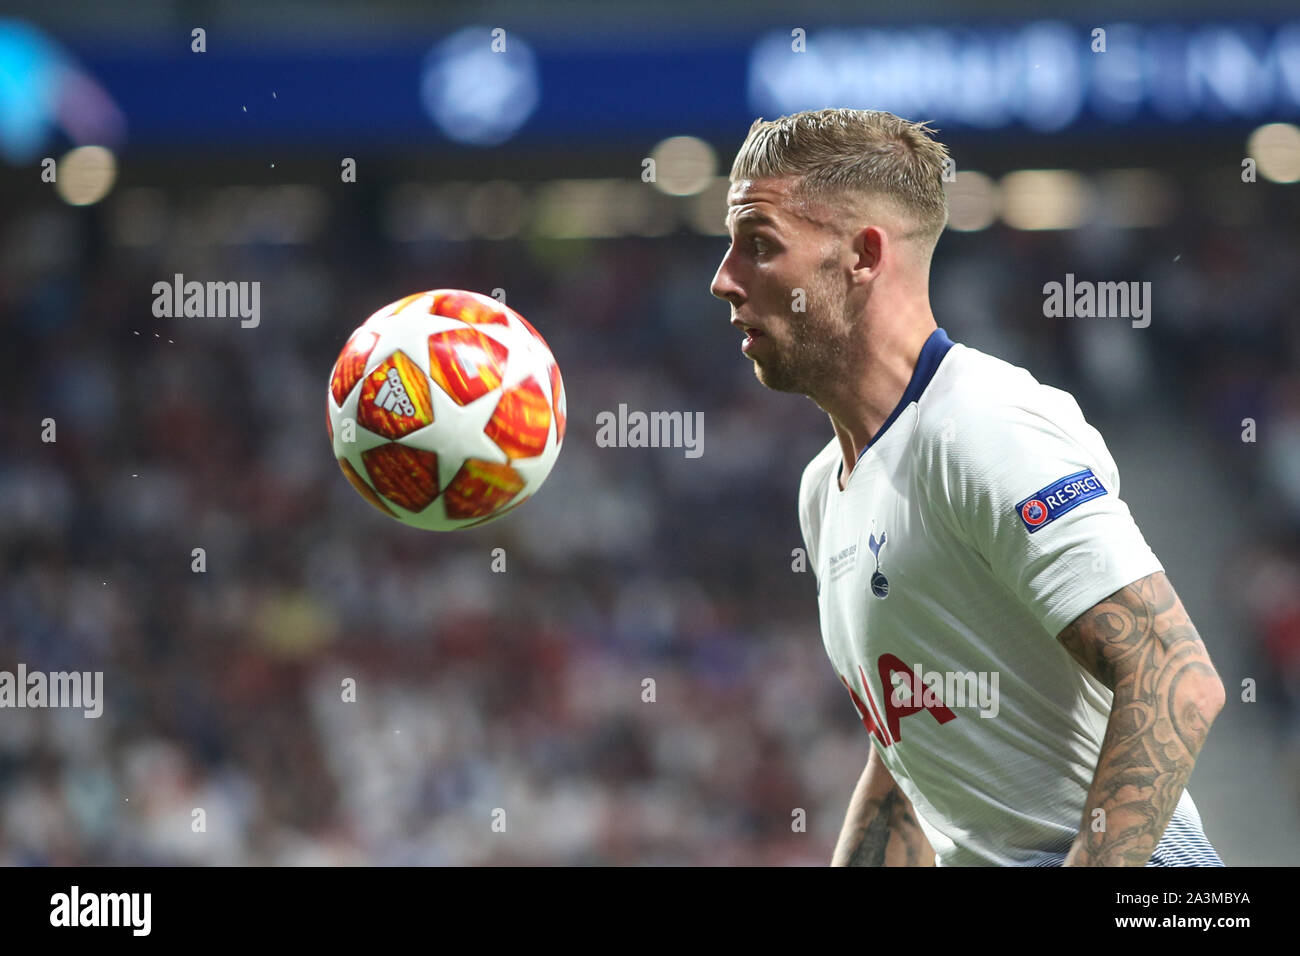 MADRID, SPAIN - JUNE 01, 2019: Toby Alderweireld (Tottenham) pictured during the final of the 2019/20 UEFA Champions League Final. Stock Photo